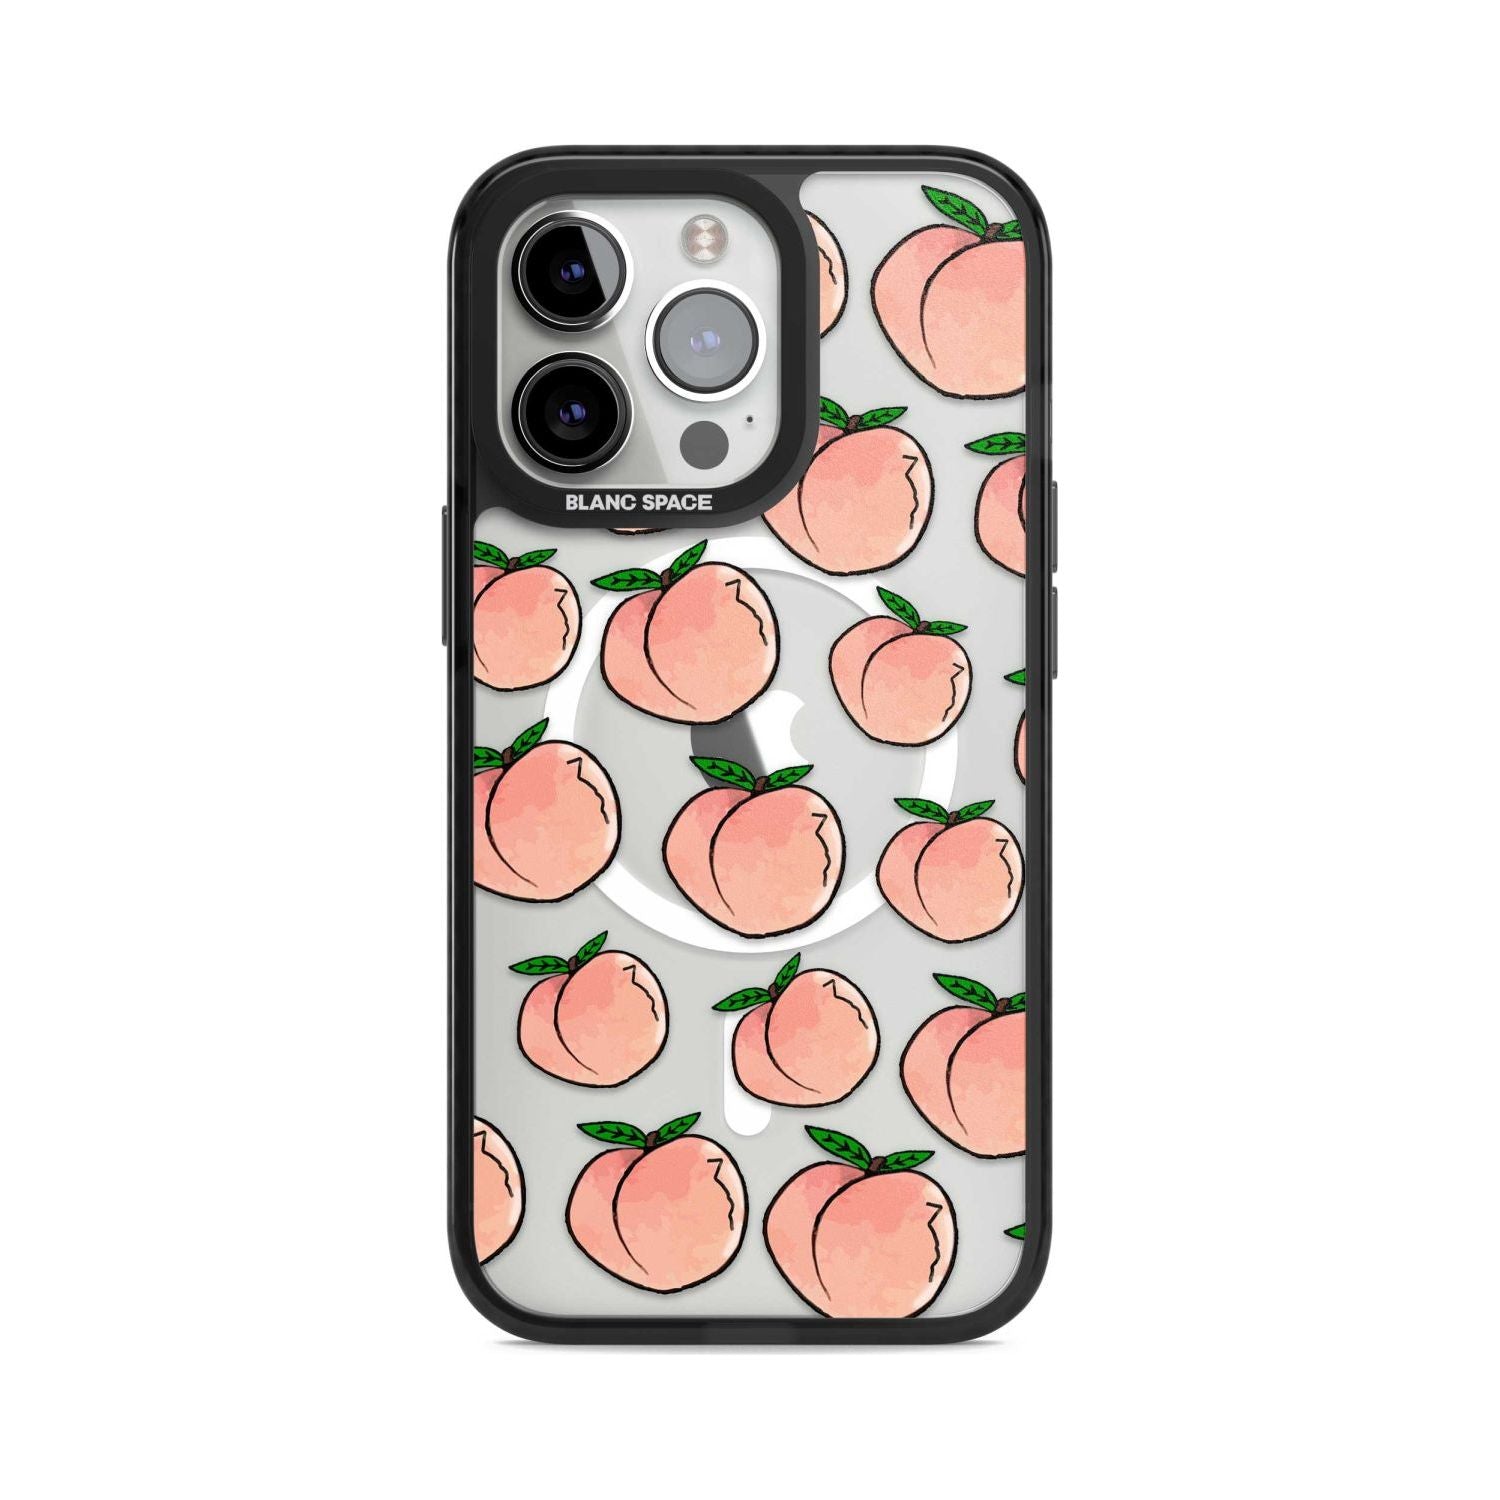 Life's a Peach Phone Case iPhone 15 Pro / Magsafe Black Impact Case,iPhone 15 Pro Max / Magsafe Black Impact Case,iPhone 14 Pro Max / Magsafe Black Impact Case,iPhone 14 Pro / Magsafe Black Impact Case,iPhone 13 Pro / Magsafe Black Impact Case,iPhone 15 Ultra / Magsafe Black Impact Case Blanc Space